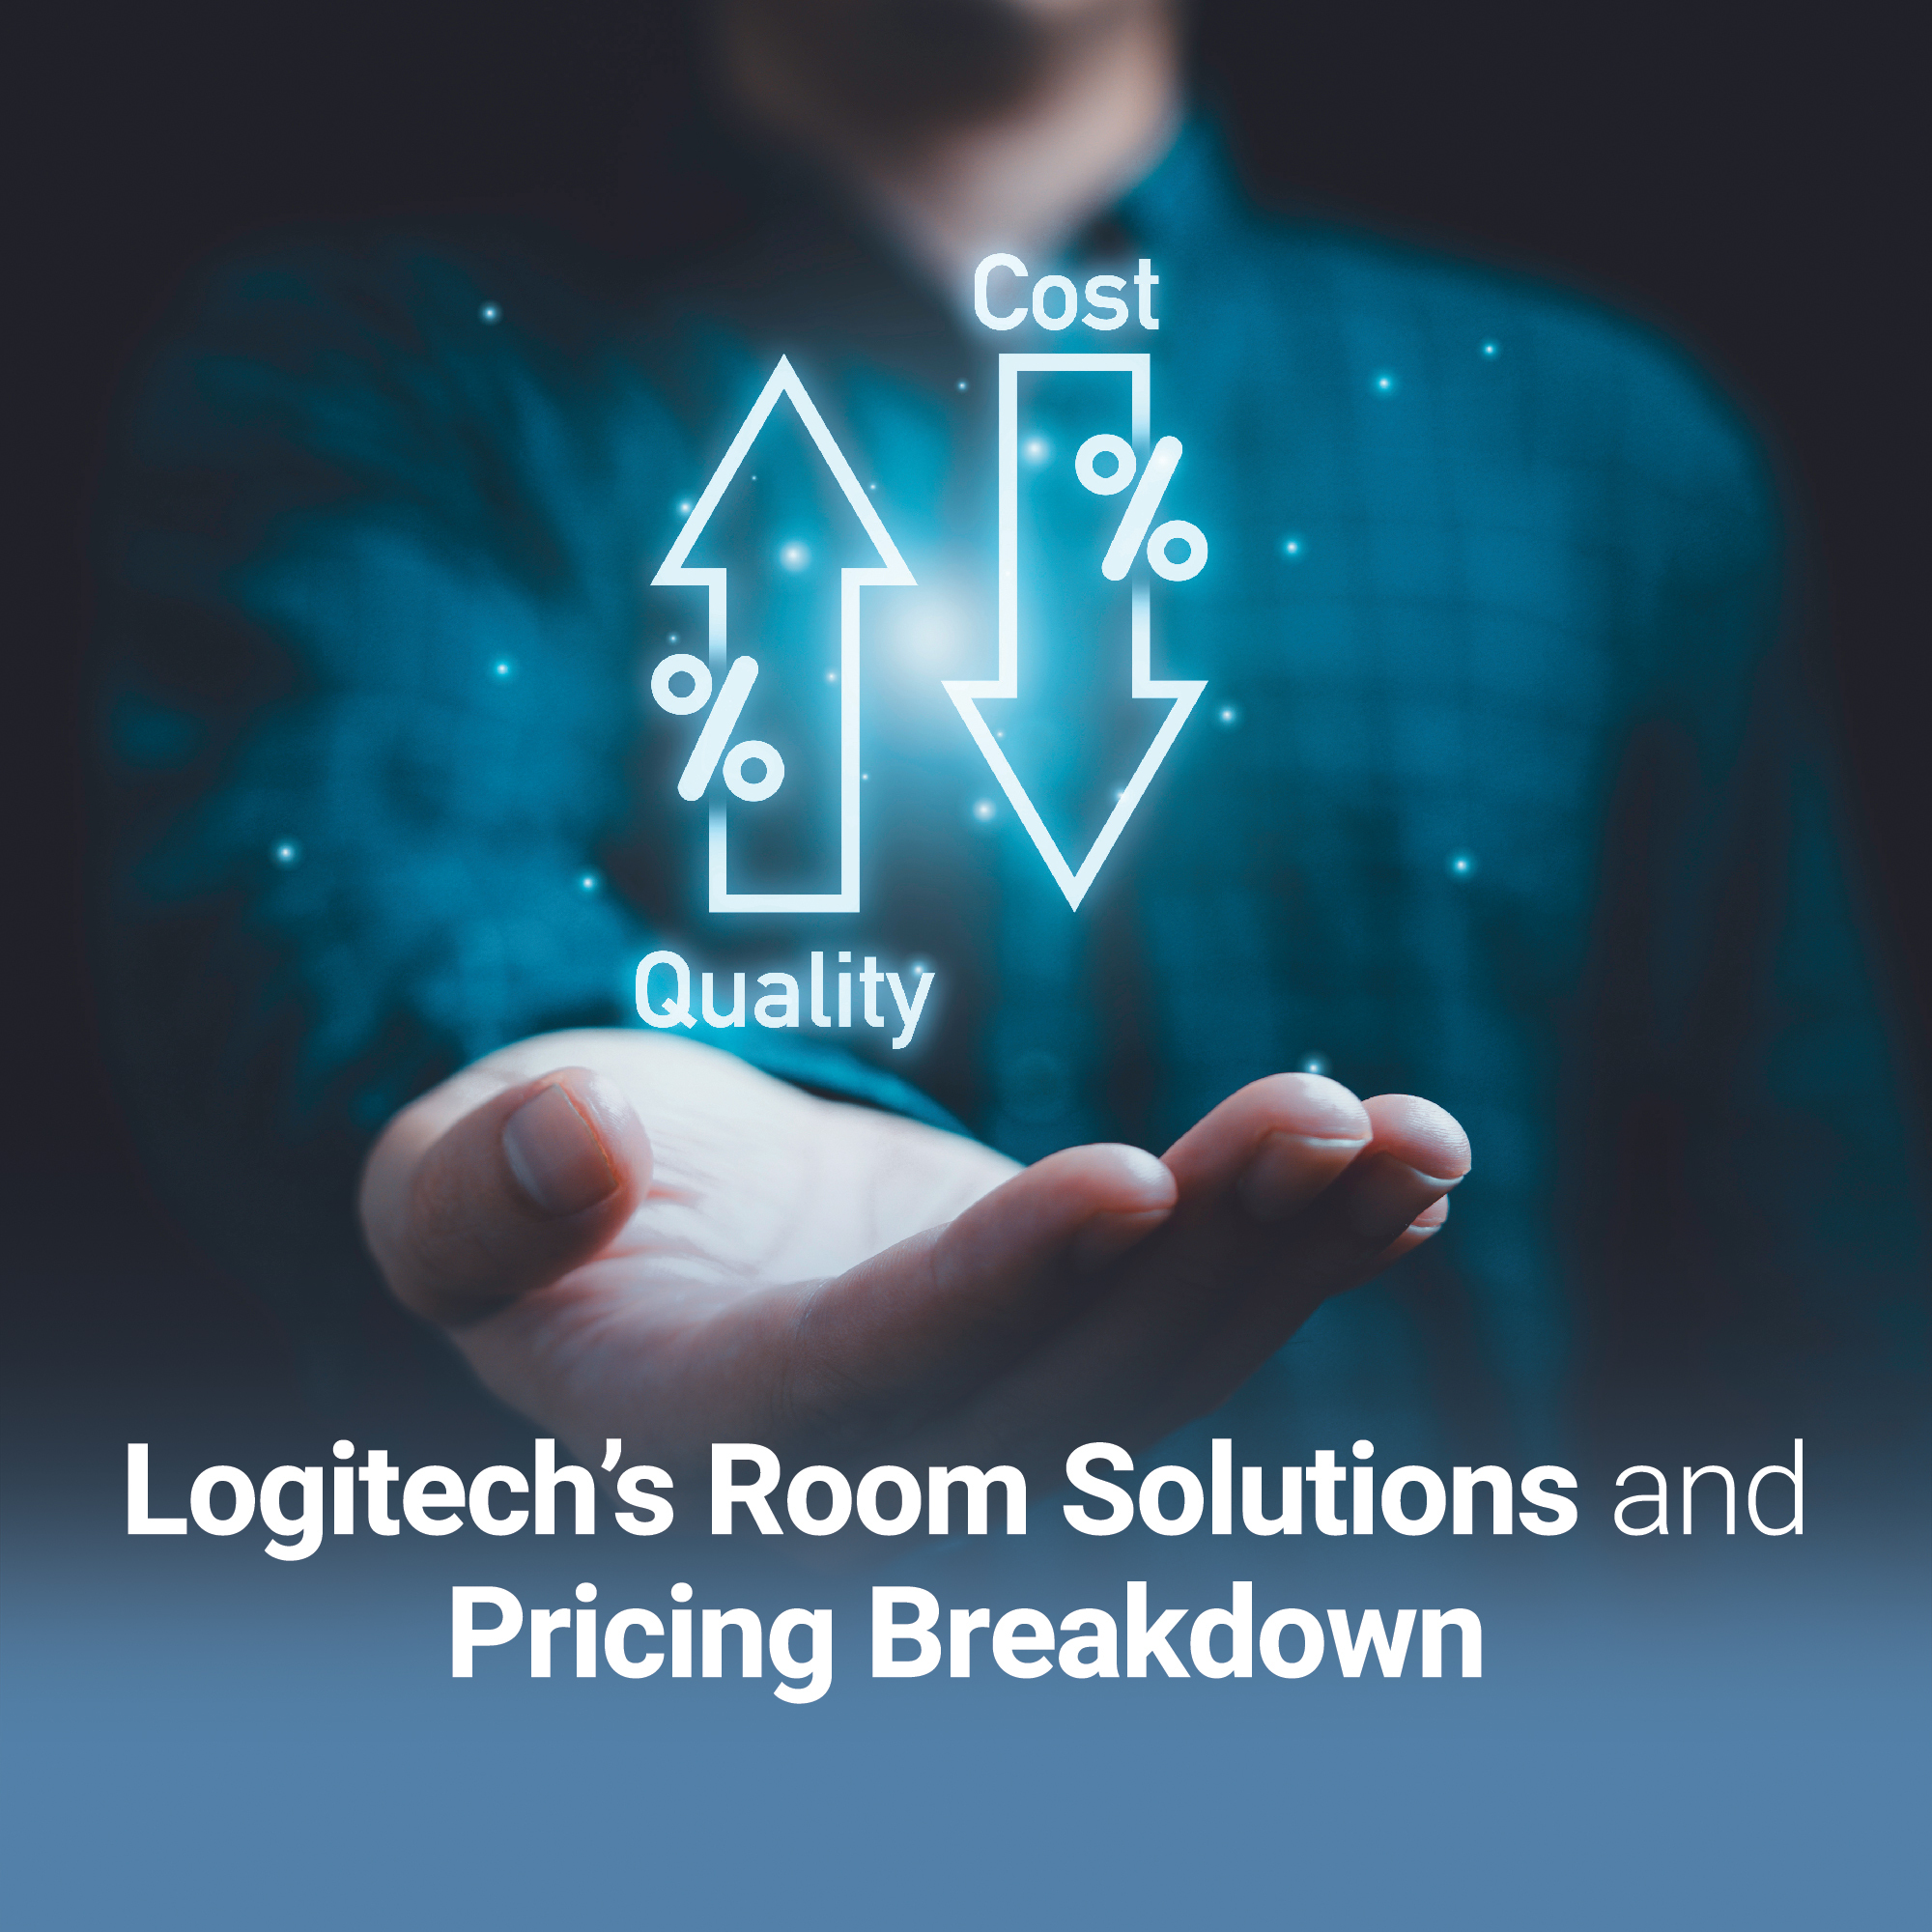 Logitech’s Room Solutions and Pricing Breakdown